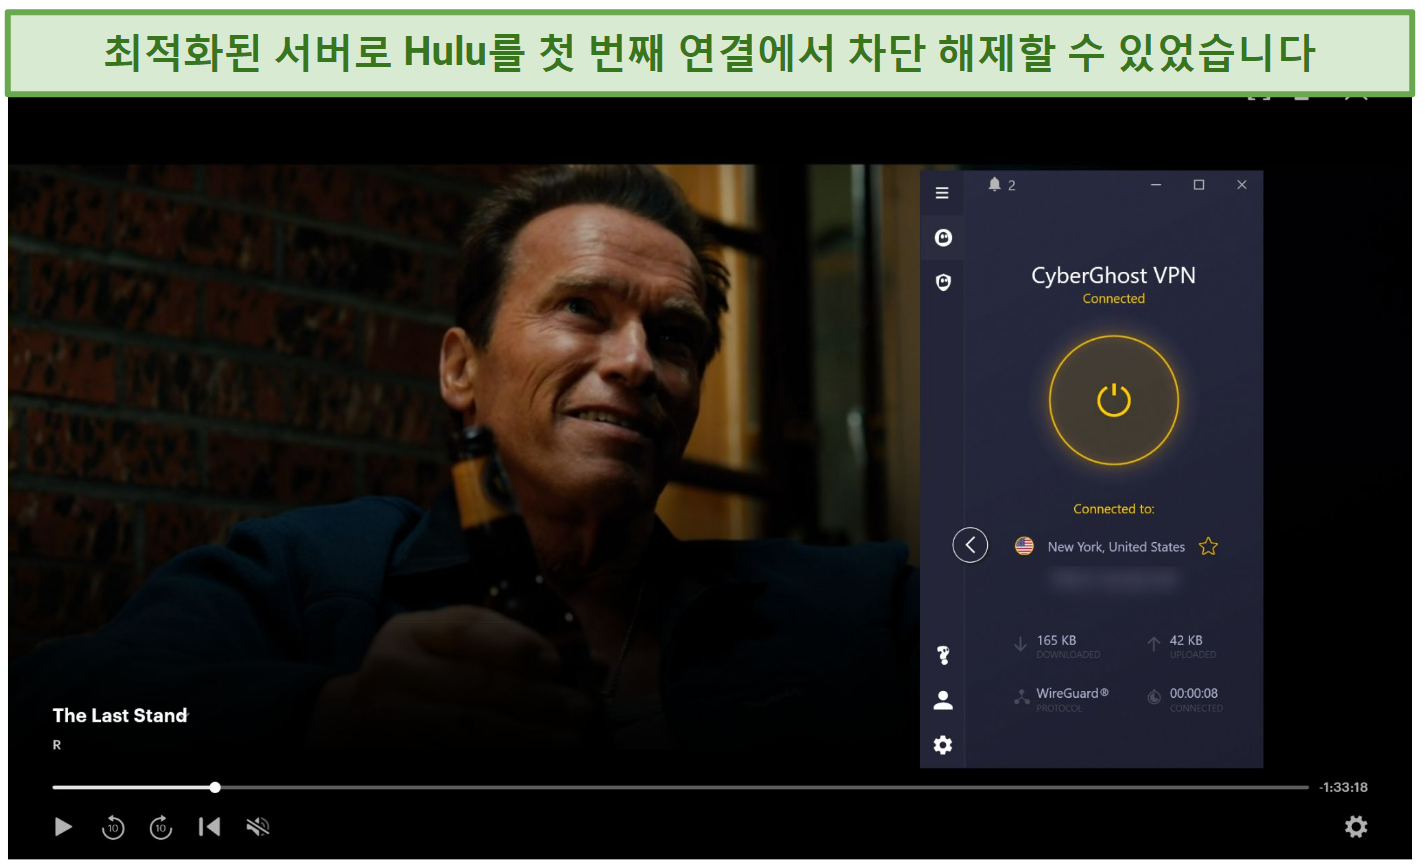 Screenshot of Hulu player streaming The Last Stand while connected to CyberGhost's Hulu server